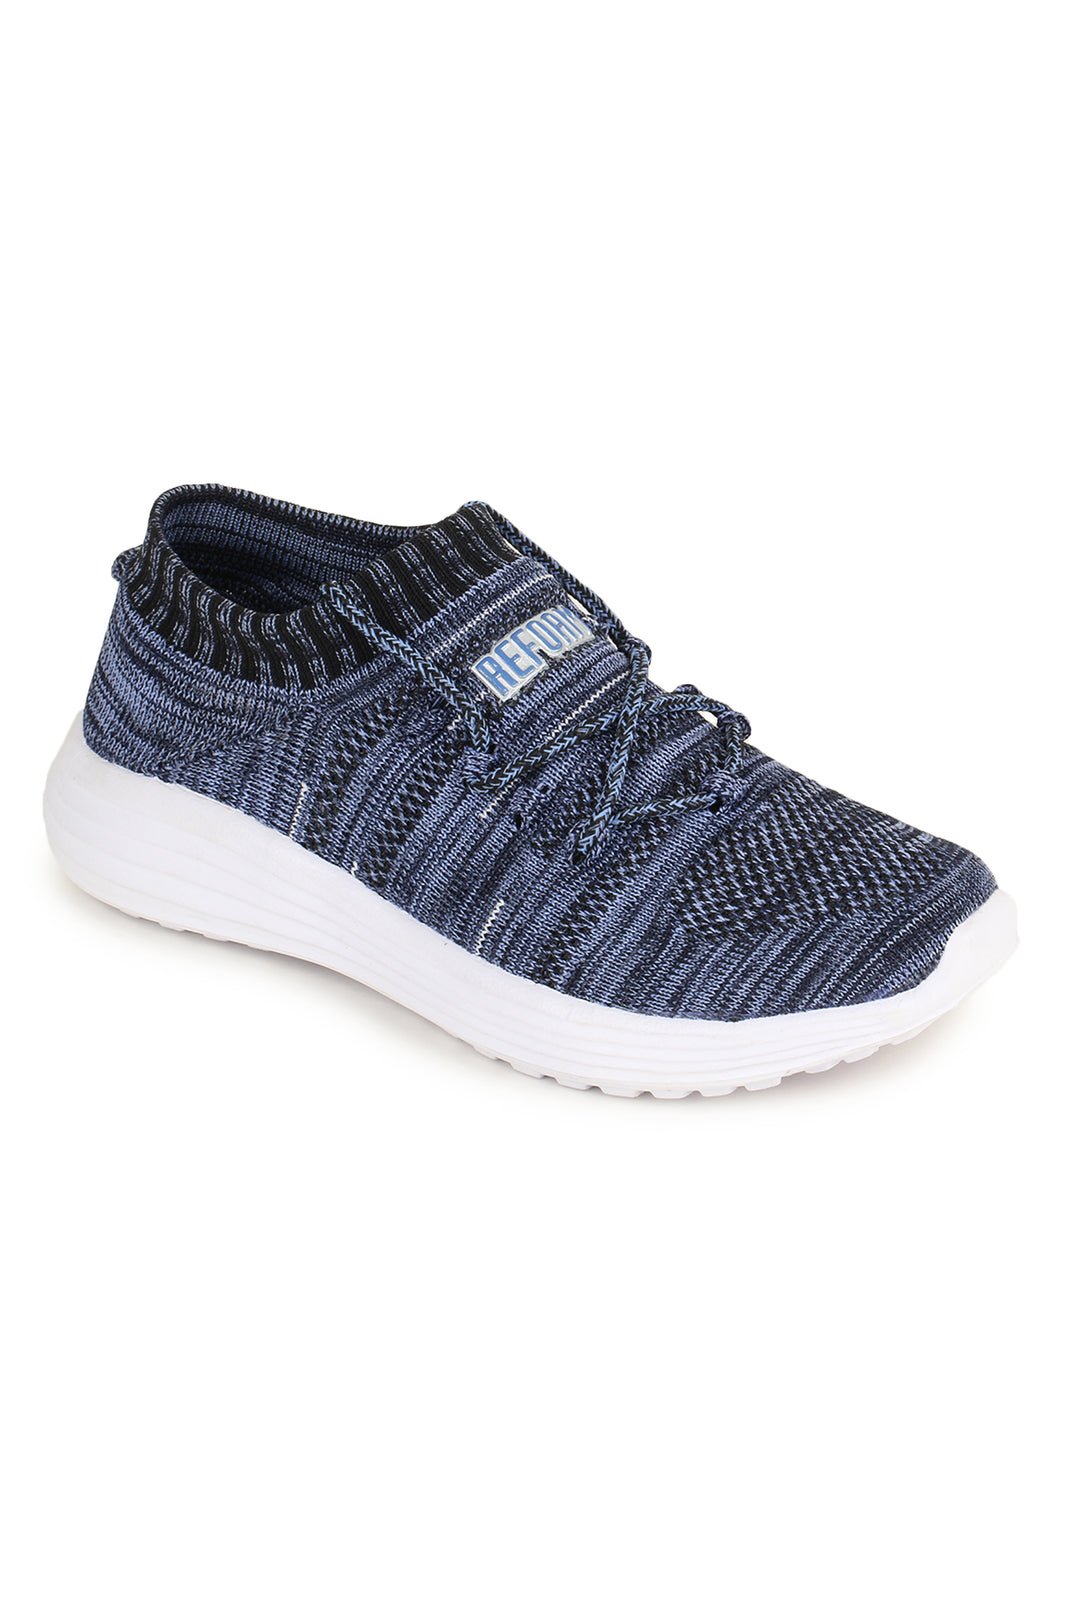 Grey Solid Mesh Lace Up Running Sport Shoes For Women